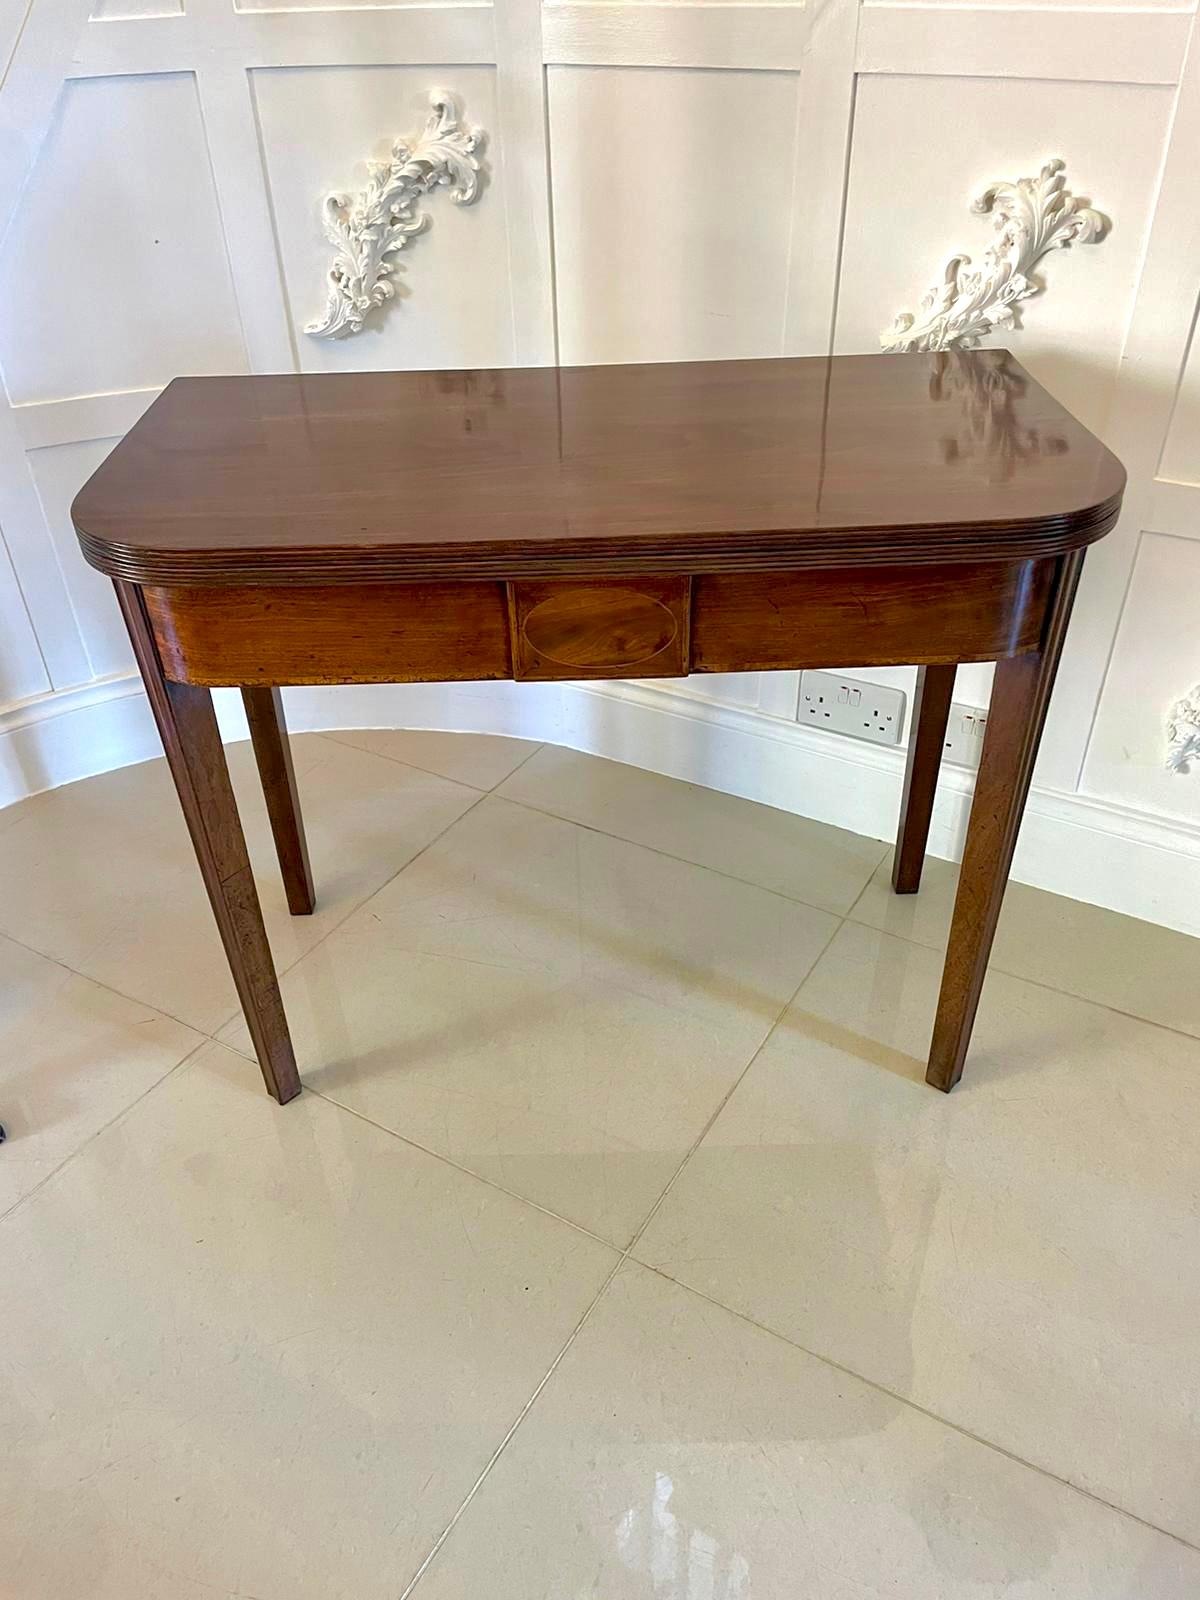 Antique George III quality mahogany tea table having a quality mahogany fold over top with a reeded edge opening to reveal a polished interior, shaped mahogany frieze with satinwood inlay standing on four mahogany tapering reeded legs 

A classic